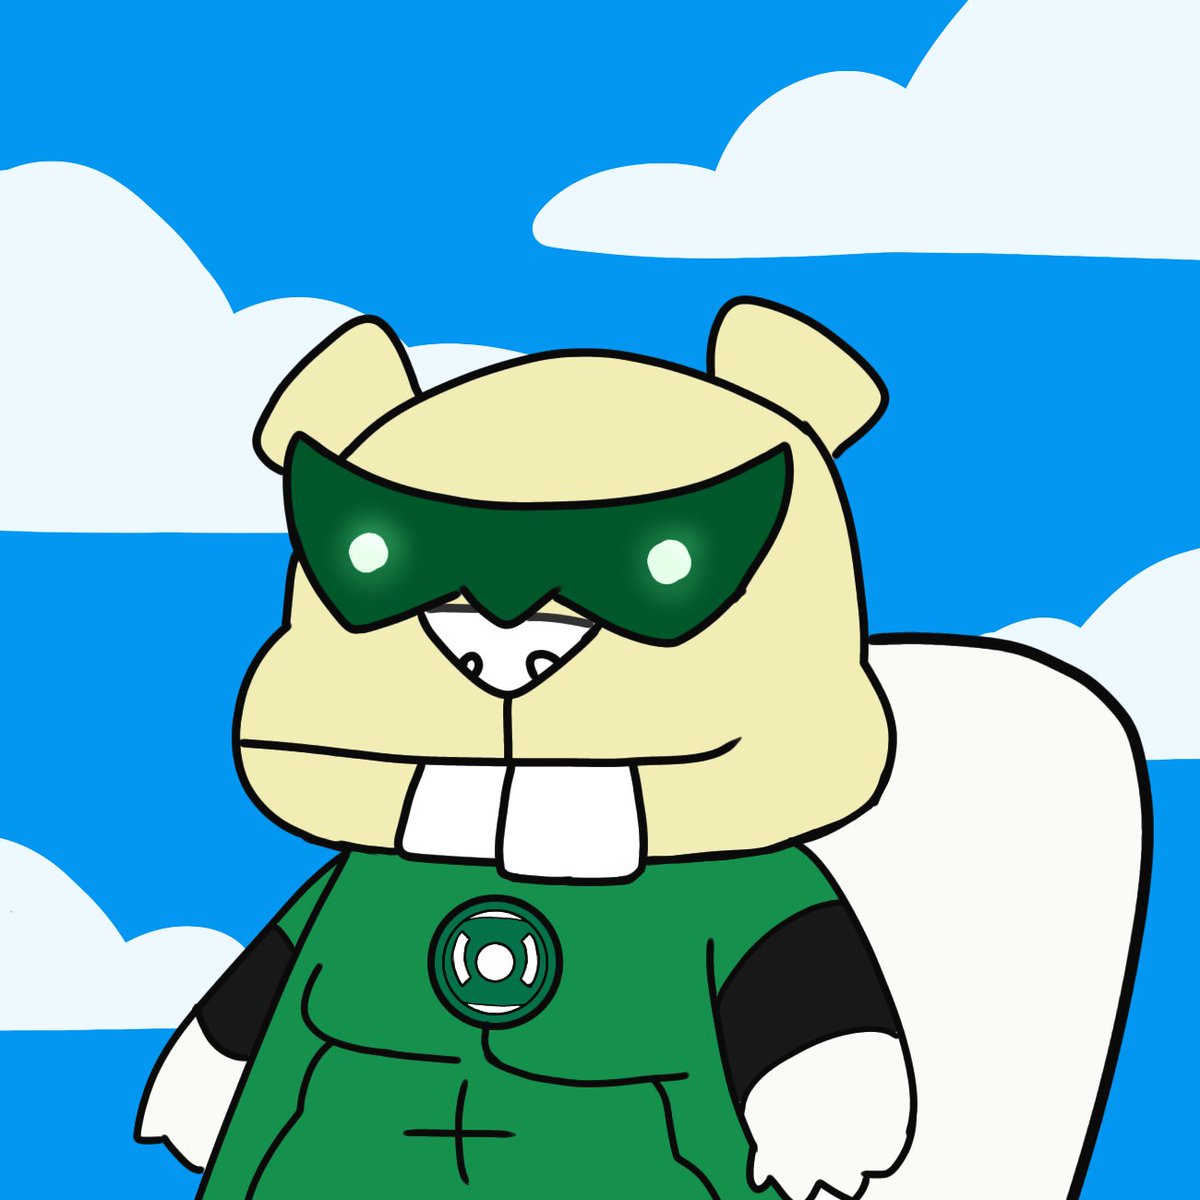 Another hard work for gumbo! hope you guys noticing me @thegumboworld @classicmuffinn @Appic @UD @bchung @0xBoeroe @BlueTigerNFT  this is my Green Gumbo Lantern. (edited)